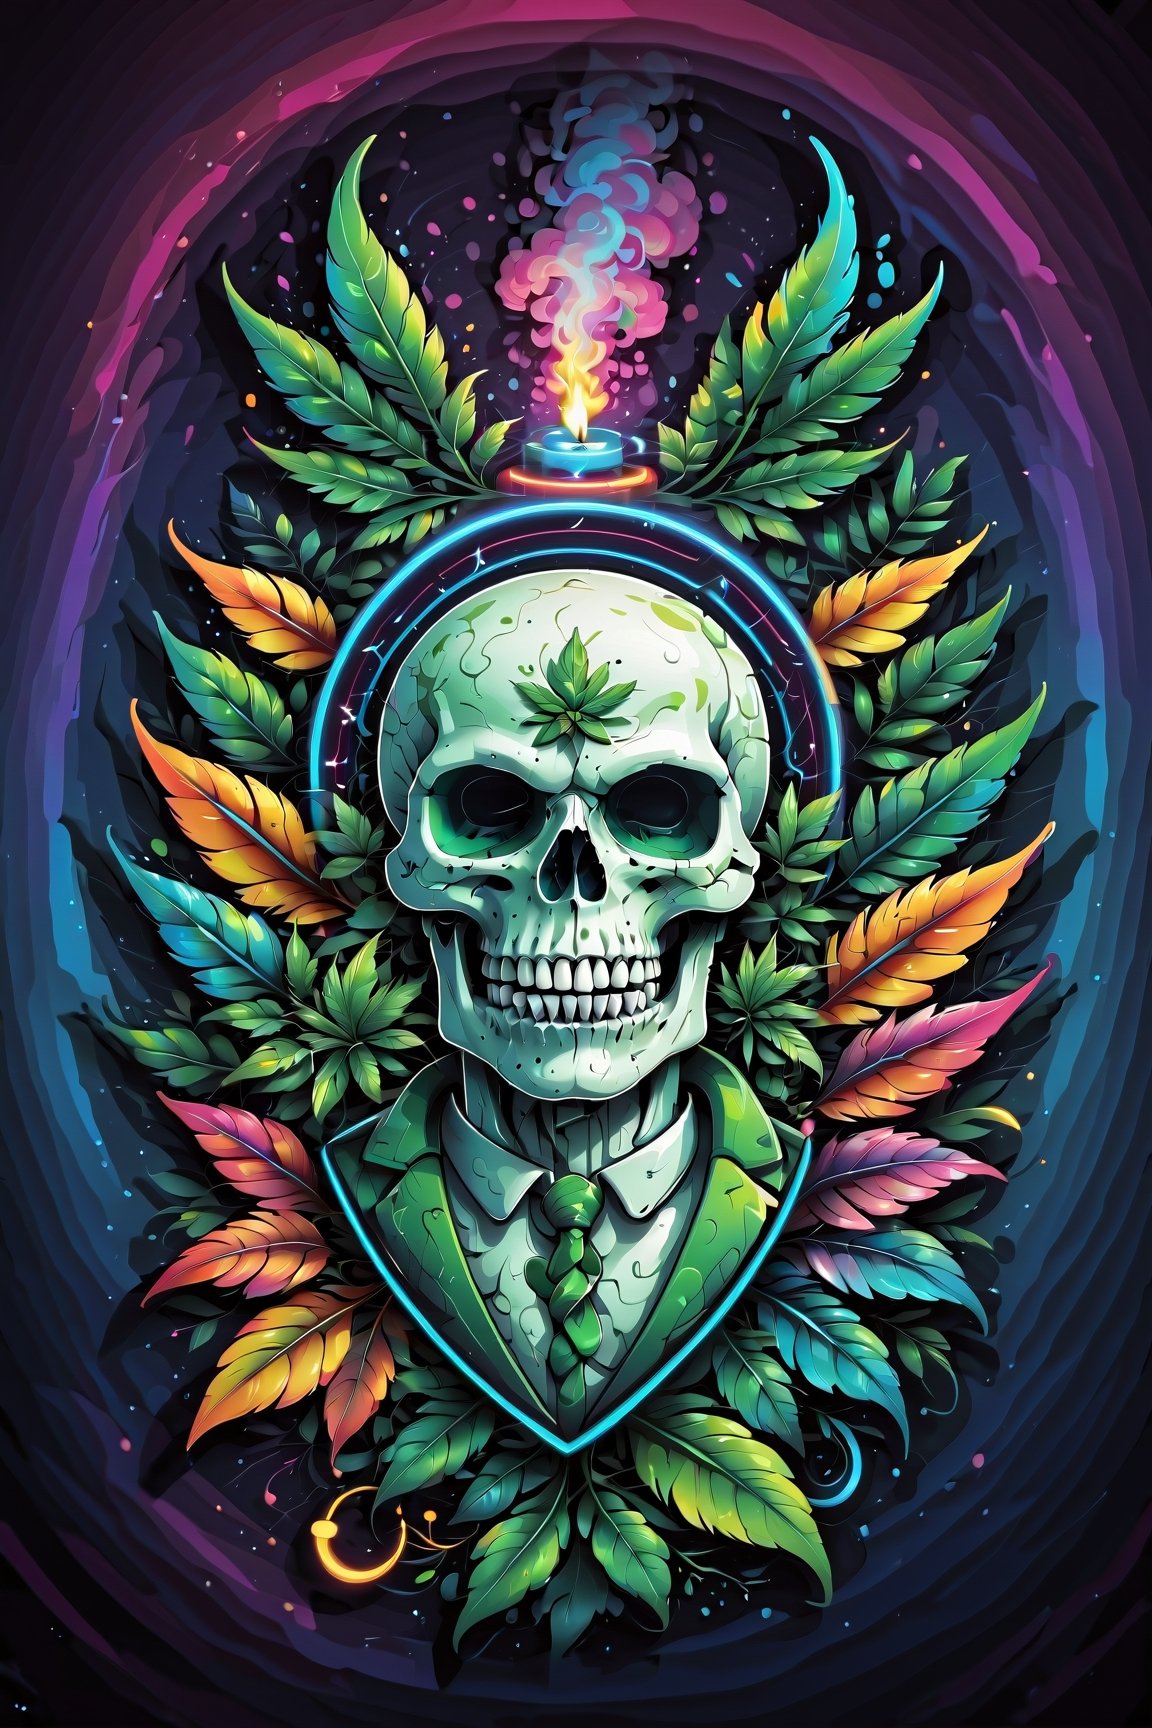 Logo business neon colors, cartoon style flat vector, mascot design, character design, cartoon, 
skull with a vibrant rainbow palette, smoking a weed joint amidst swirling cannabis leaves. Capture the unique fusion of darkness and colorful cannabis culture in vivid detail quality, wallpaper art, UHD, centered image, MSchiffer art, ((flat colors)), (cel-shading style) very bold neon colors, ((high saturation)) ink lines, psychedelic environment

